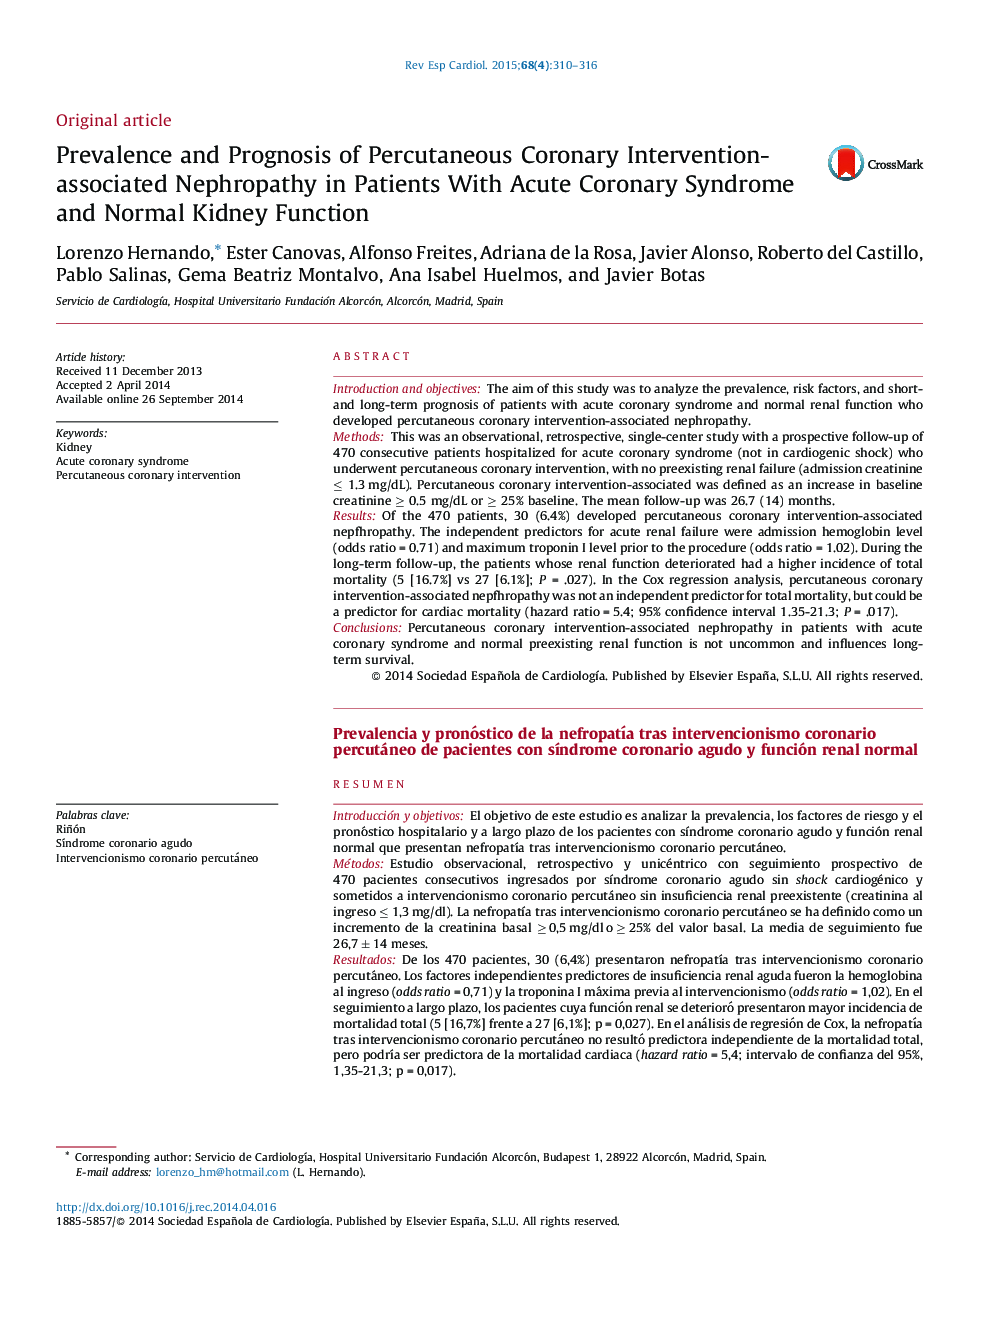 Prevalence and Prognosis of Percutaneous Coronary Intervention-associated Nephropathy in Patients With Acute Coronary Syndrome and Normal Kidney Function